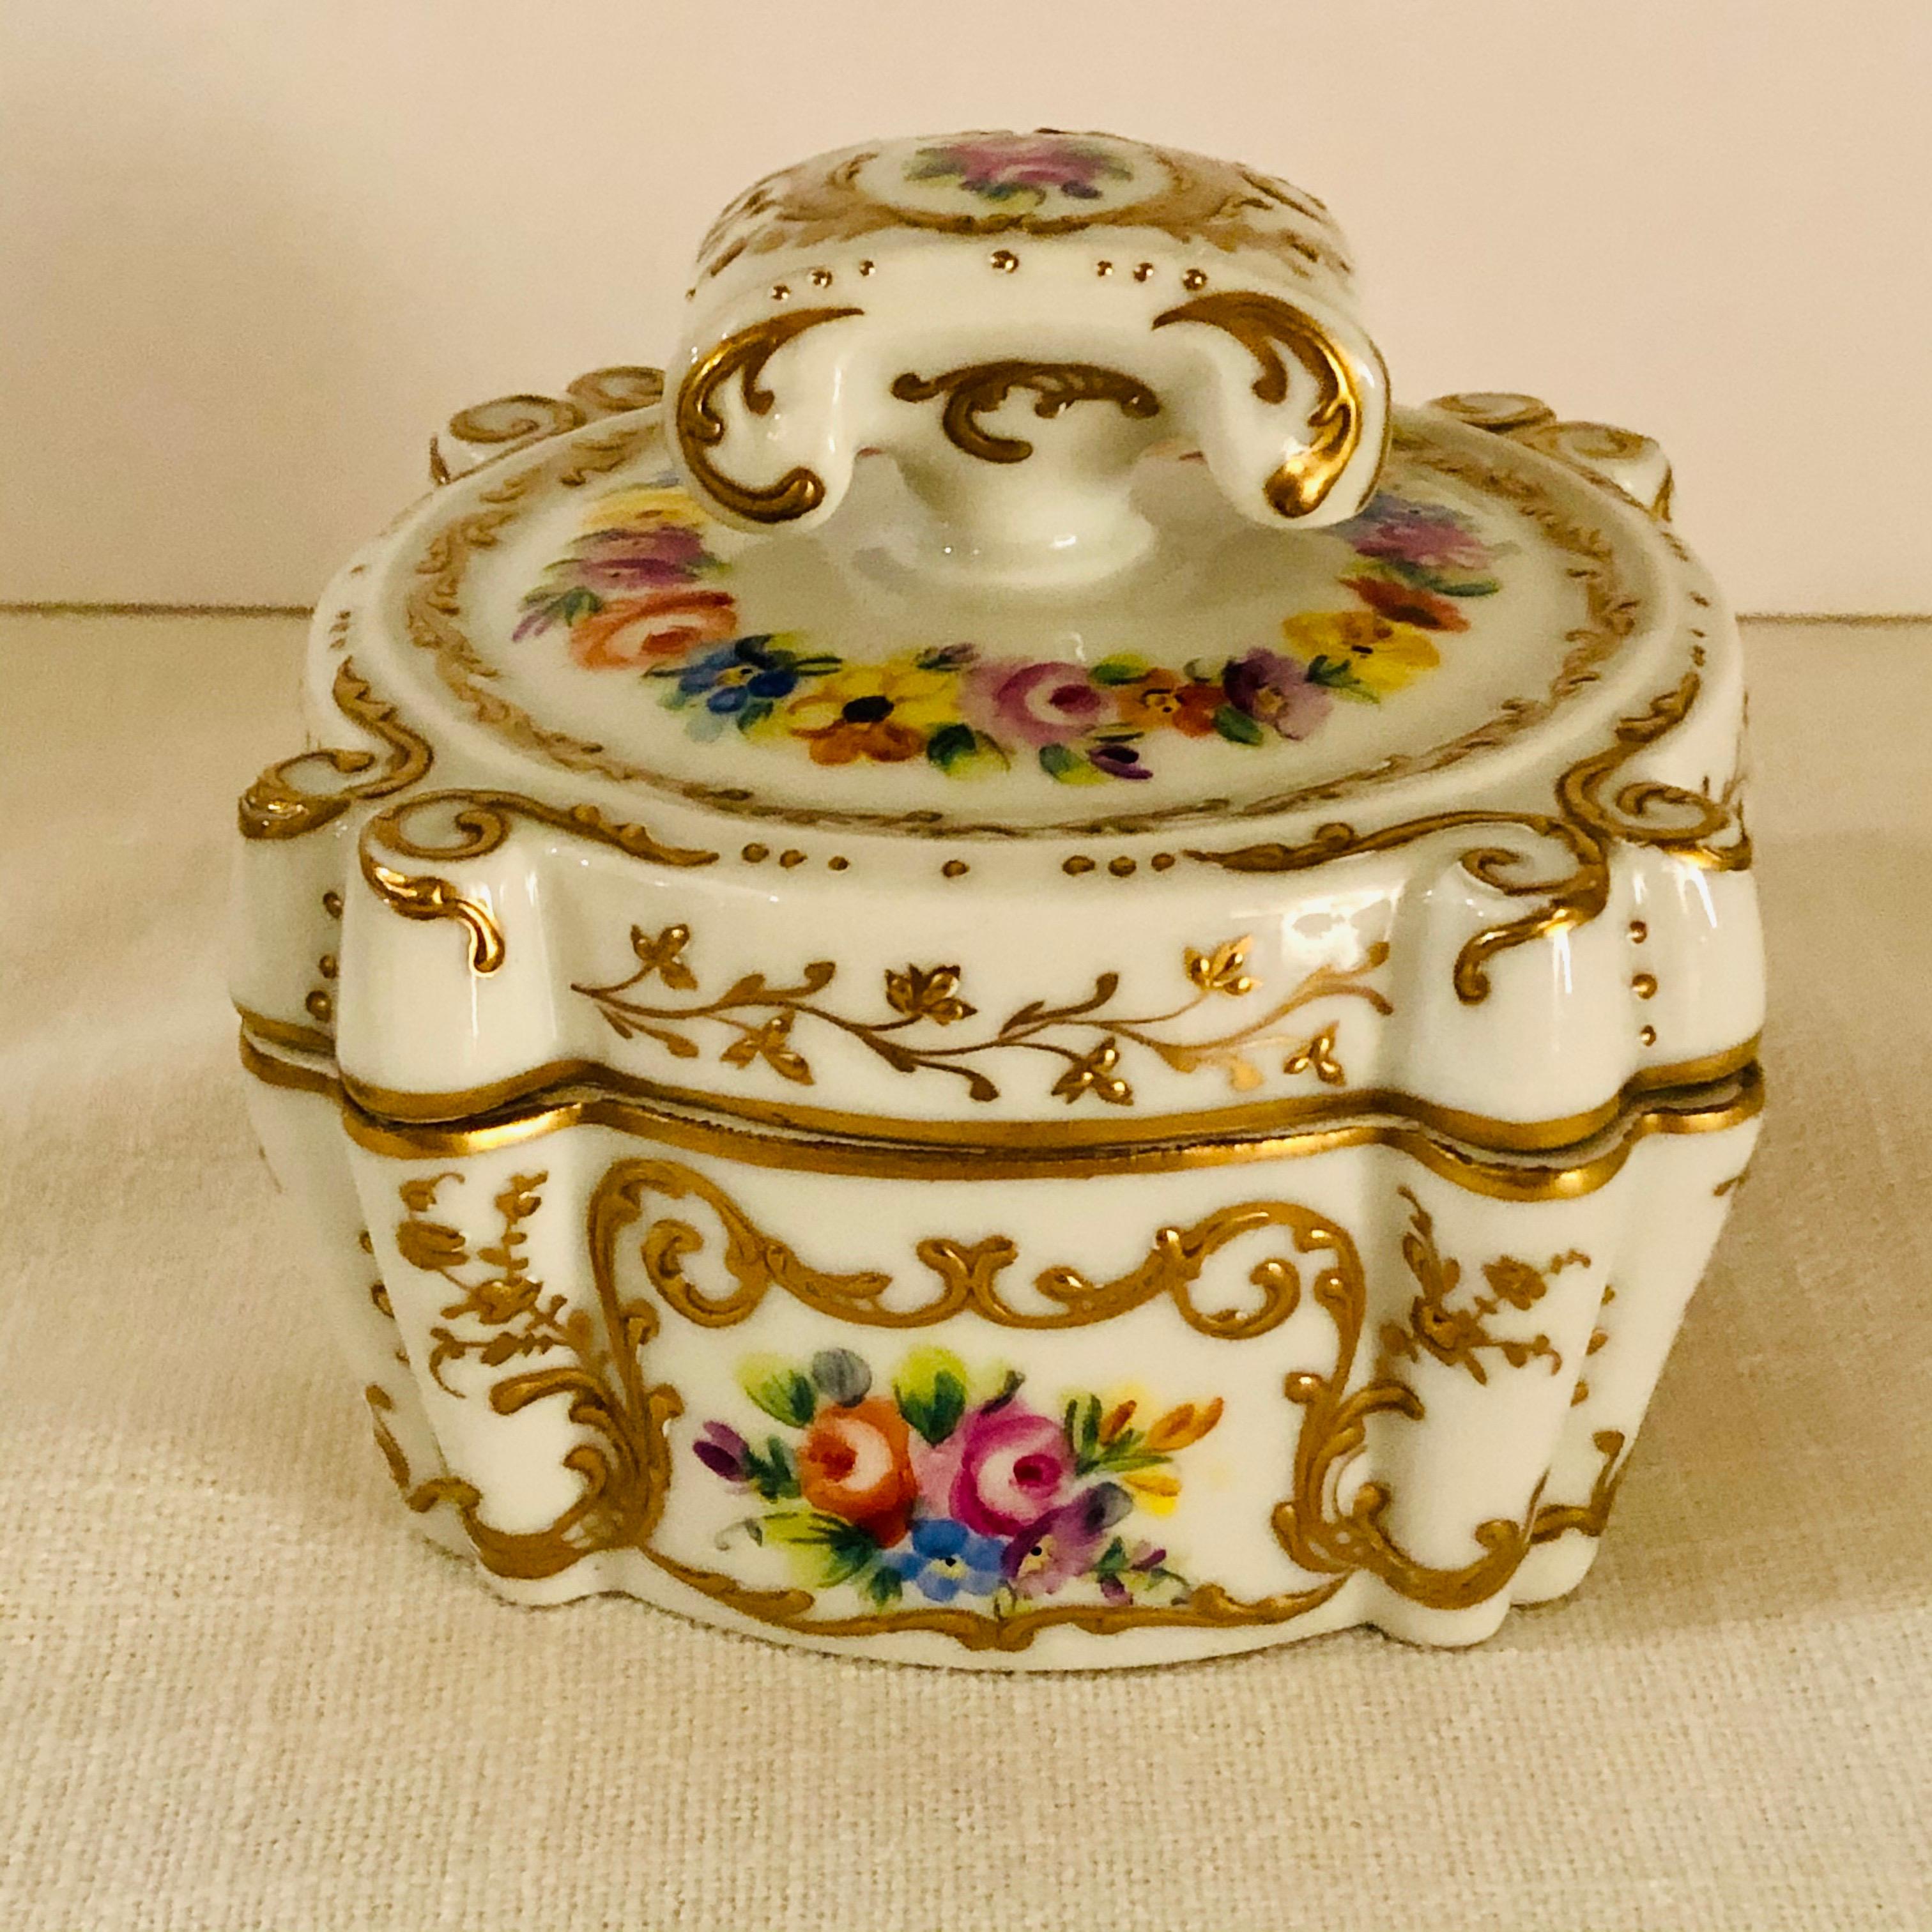 This is an exquisite Le Tallec dresser or jewelry box. It is decorated with four flower bouquets and is embellished with a filigree of raised gilding on all its sides and its top. On the top of this box, is a raised handle surrounded by a ribbon of